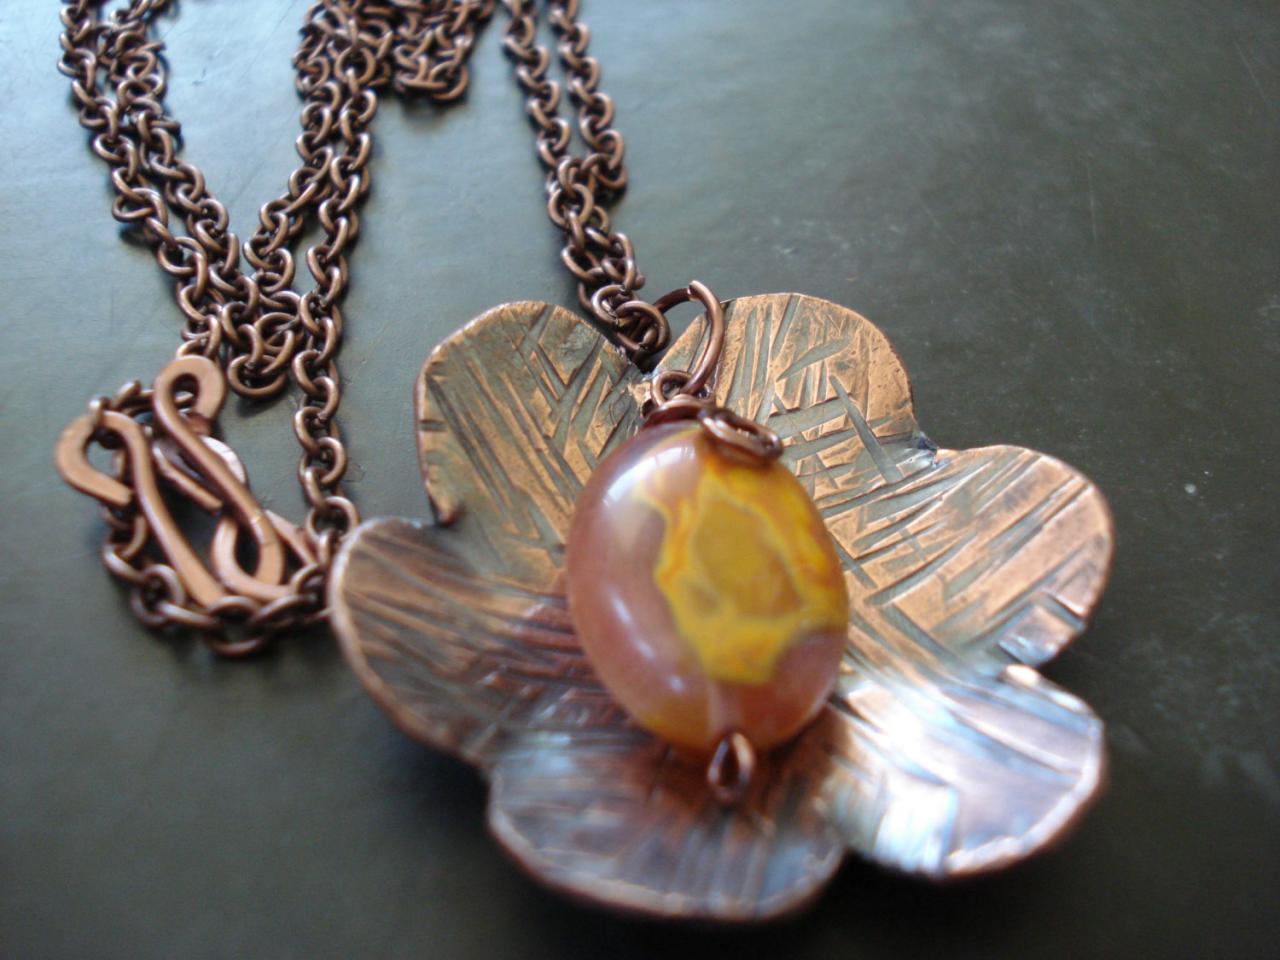 Flower Necklace,hammered Copper Jewelry, Copper Flower, Copper Jewelry, Copper Necklace, Flower Jewelry